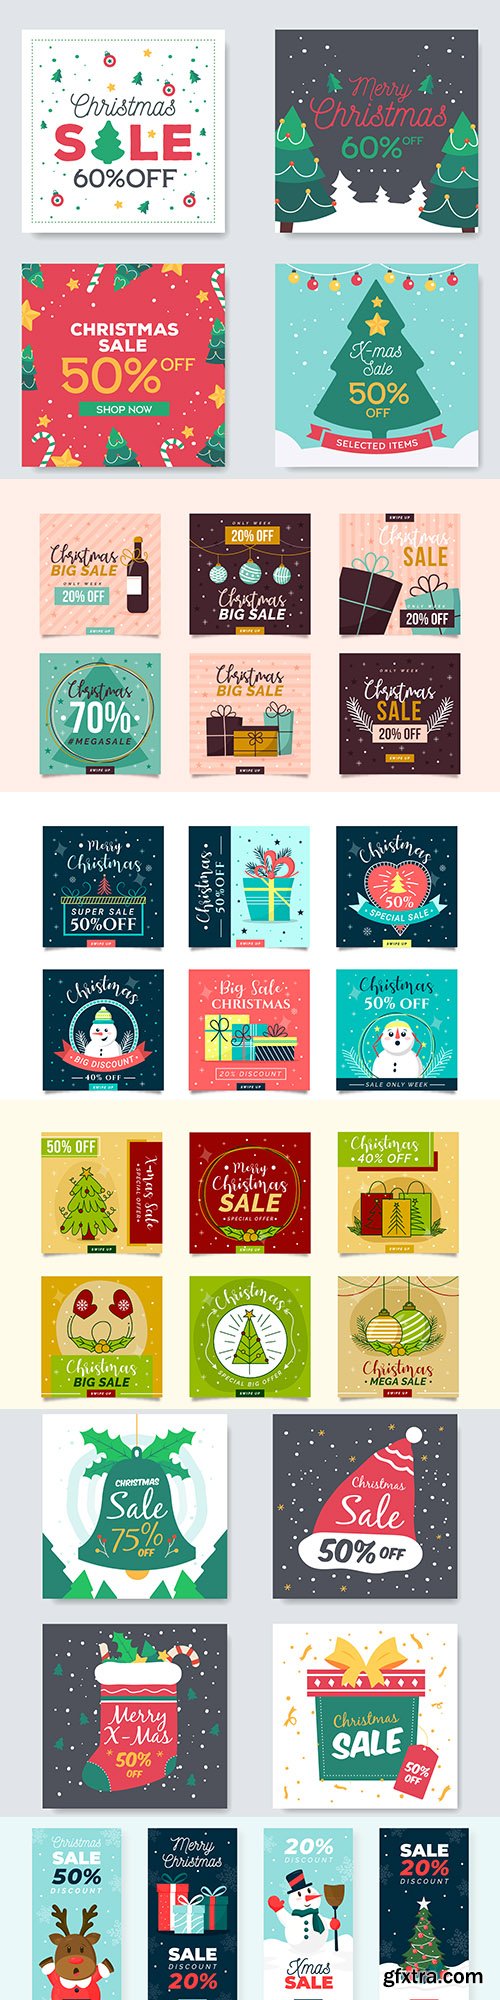 Merry Christmas sales and discounts vintage illustration